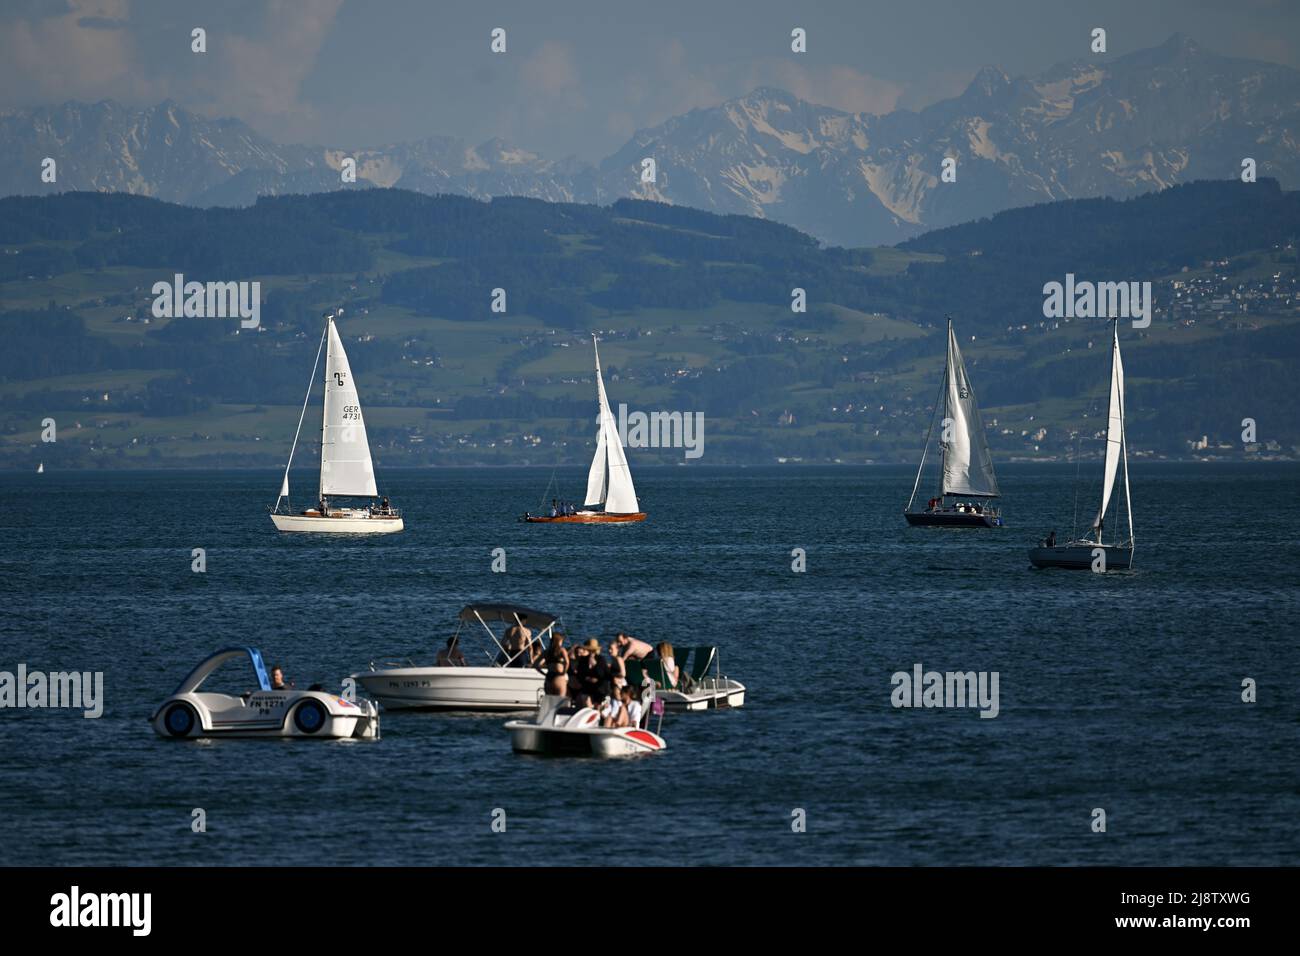 Friedrichshafen Am Bodensee, Germany. 18th May, 2022. A regatta is underway  in the evening off Friedrichshafen on Lake Constance, while the Alps in  Switzerland, shrouded in a light haze, can be seen